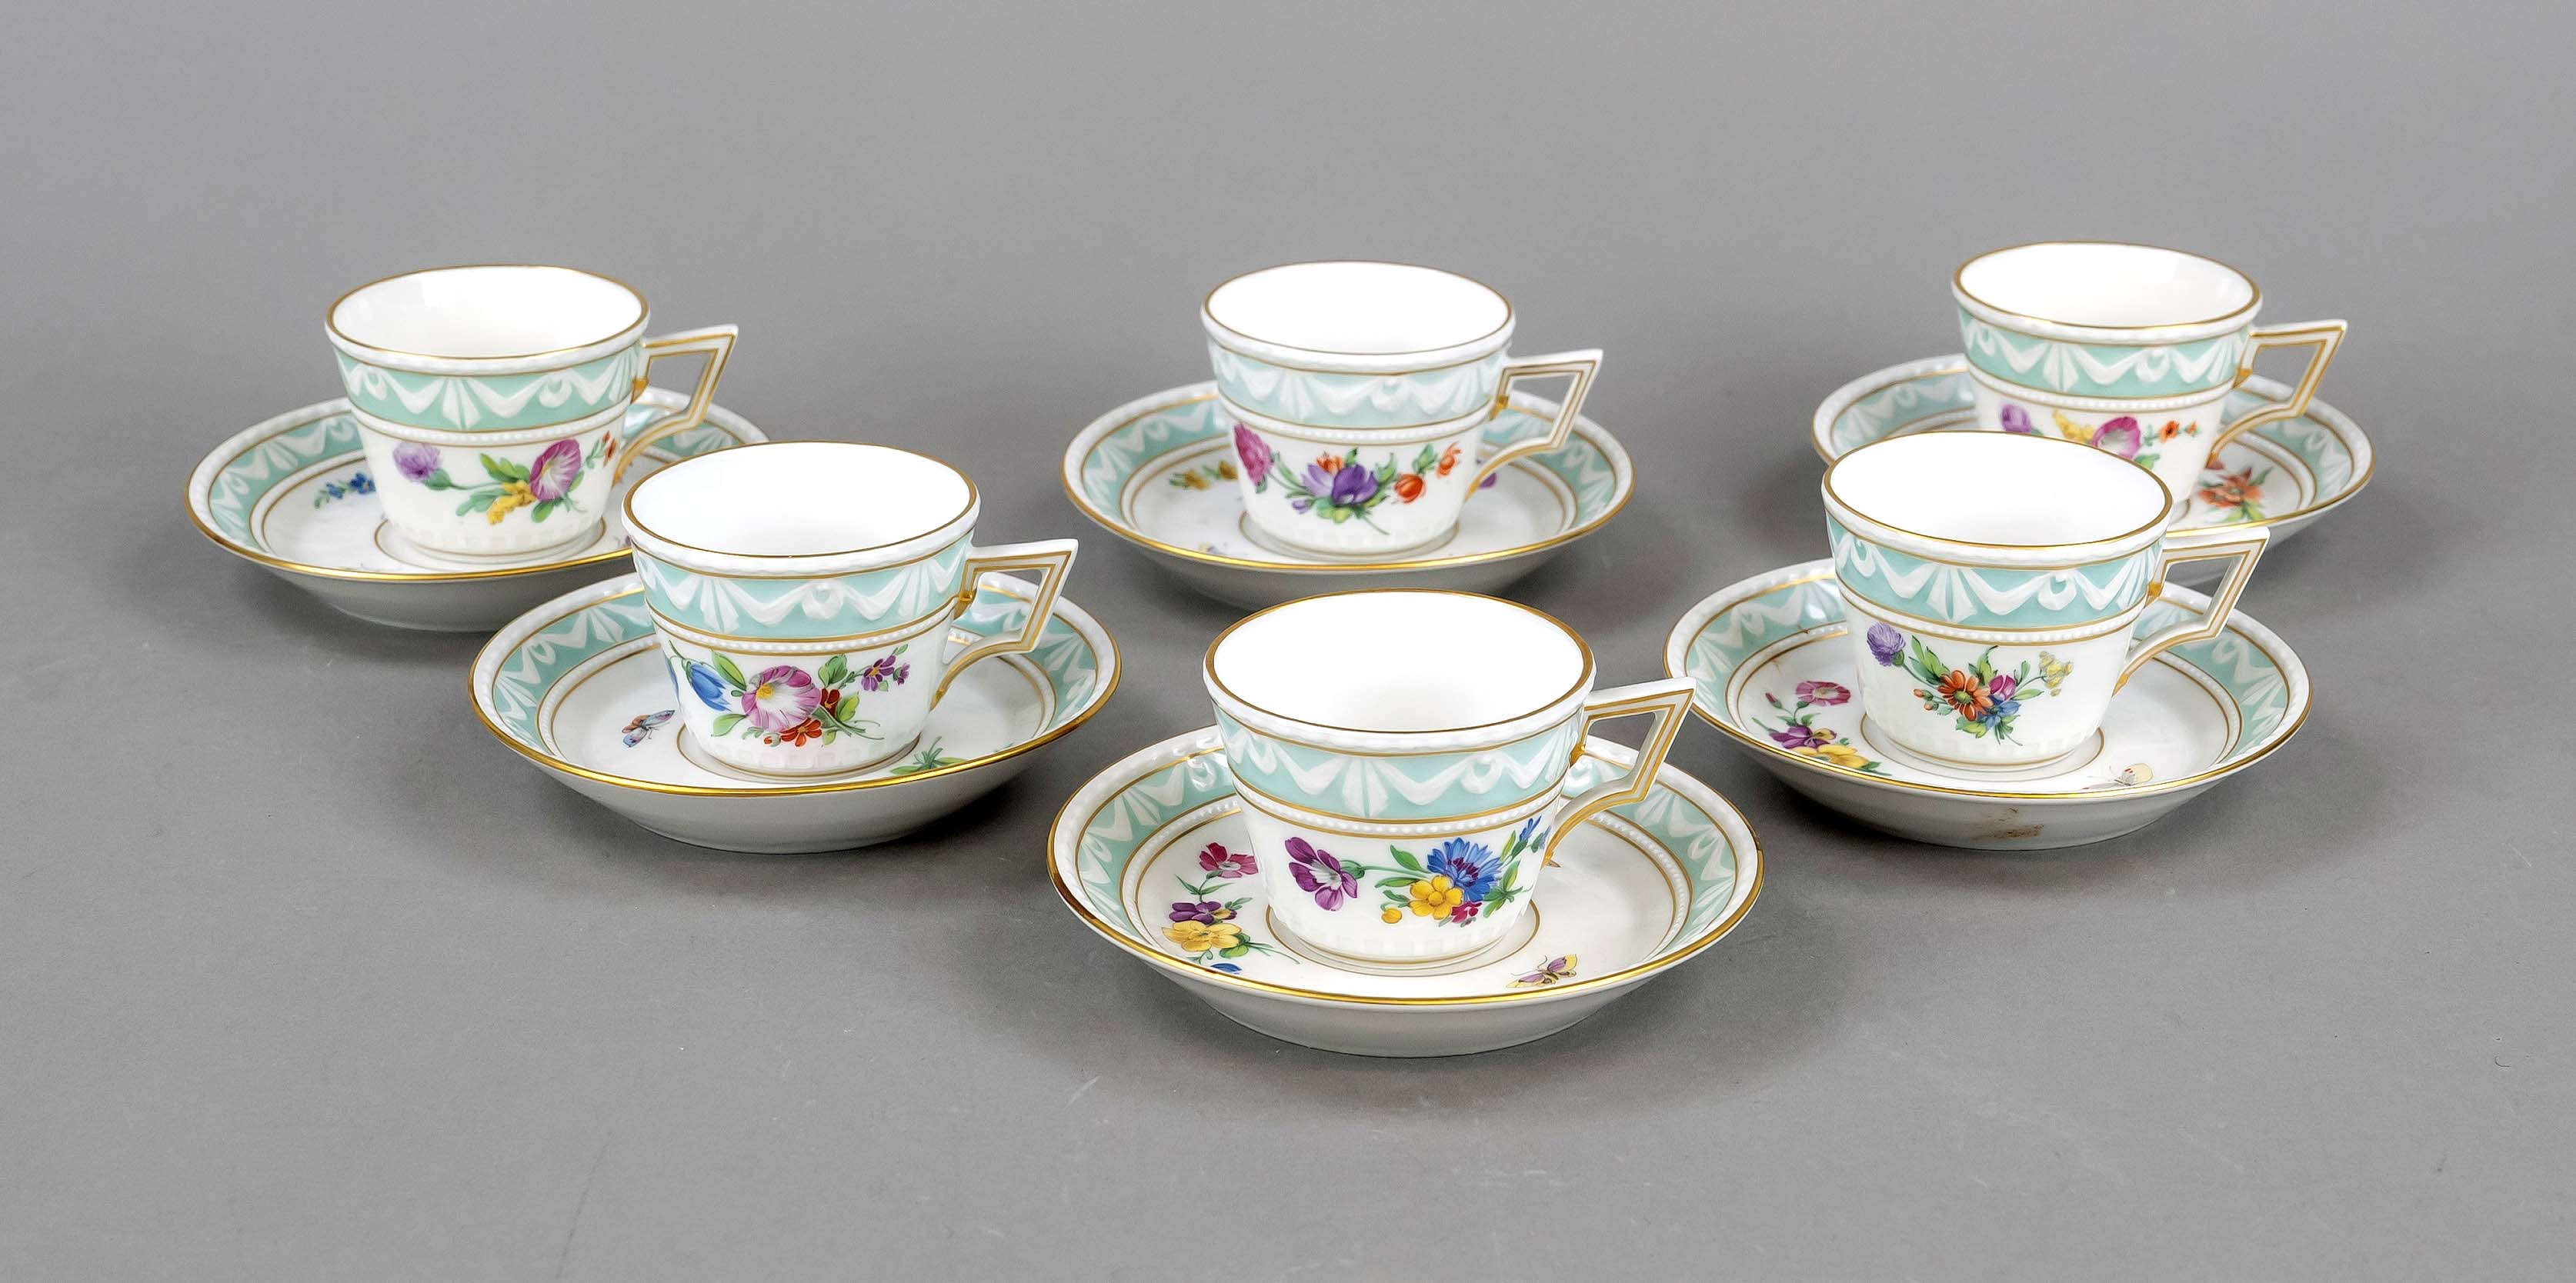 Six demitasse cups with saucer, KPM Berlin, marks 1962-1992, 1st choice, red imperial orb mark, form